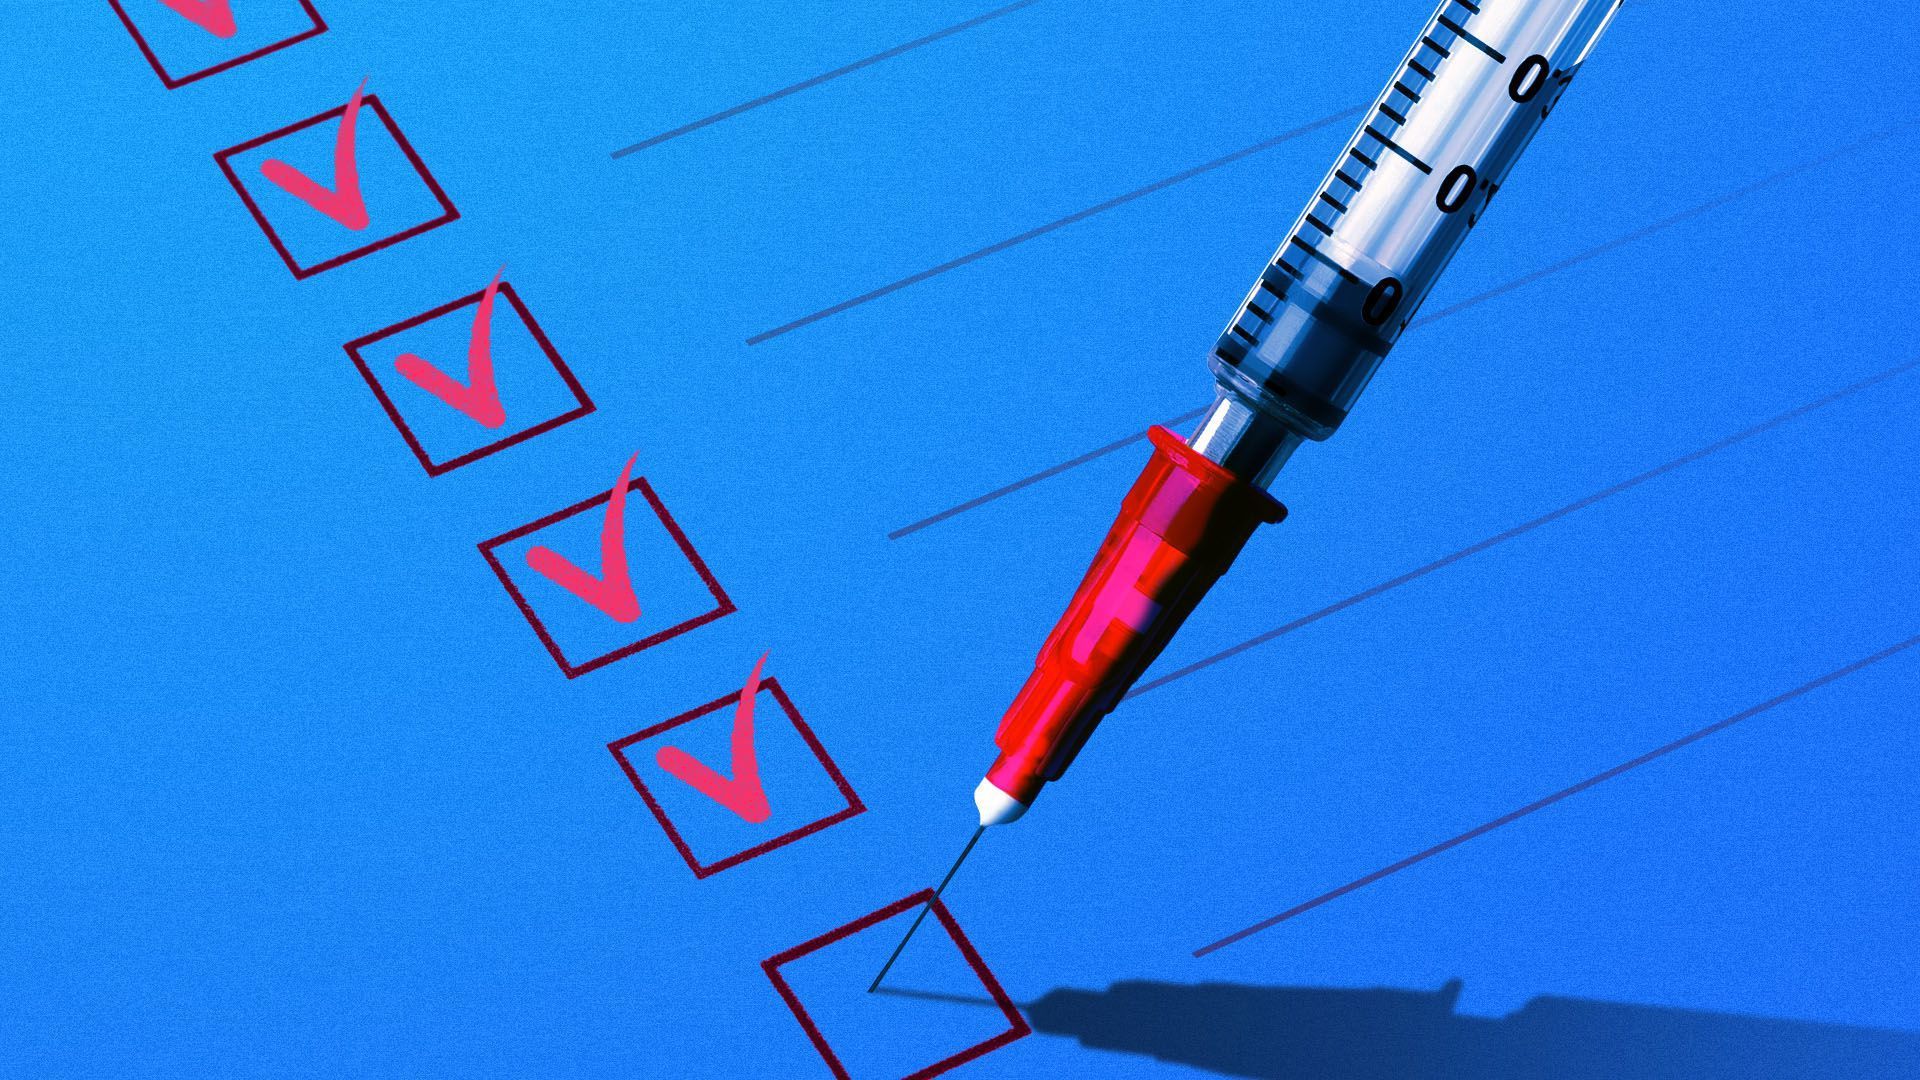 A vaccine vial is used to check off boxes on a checklist.